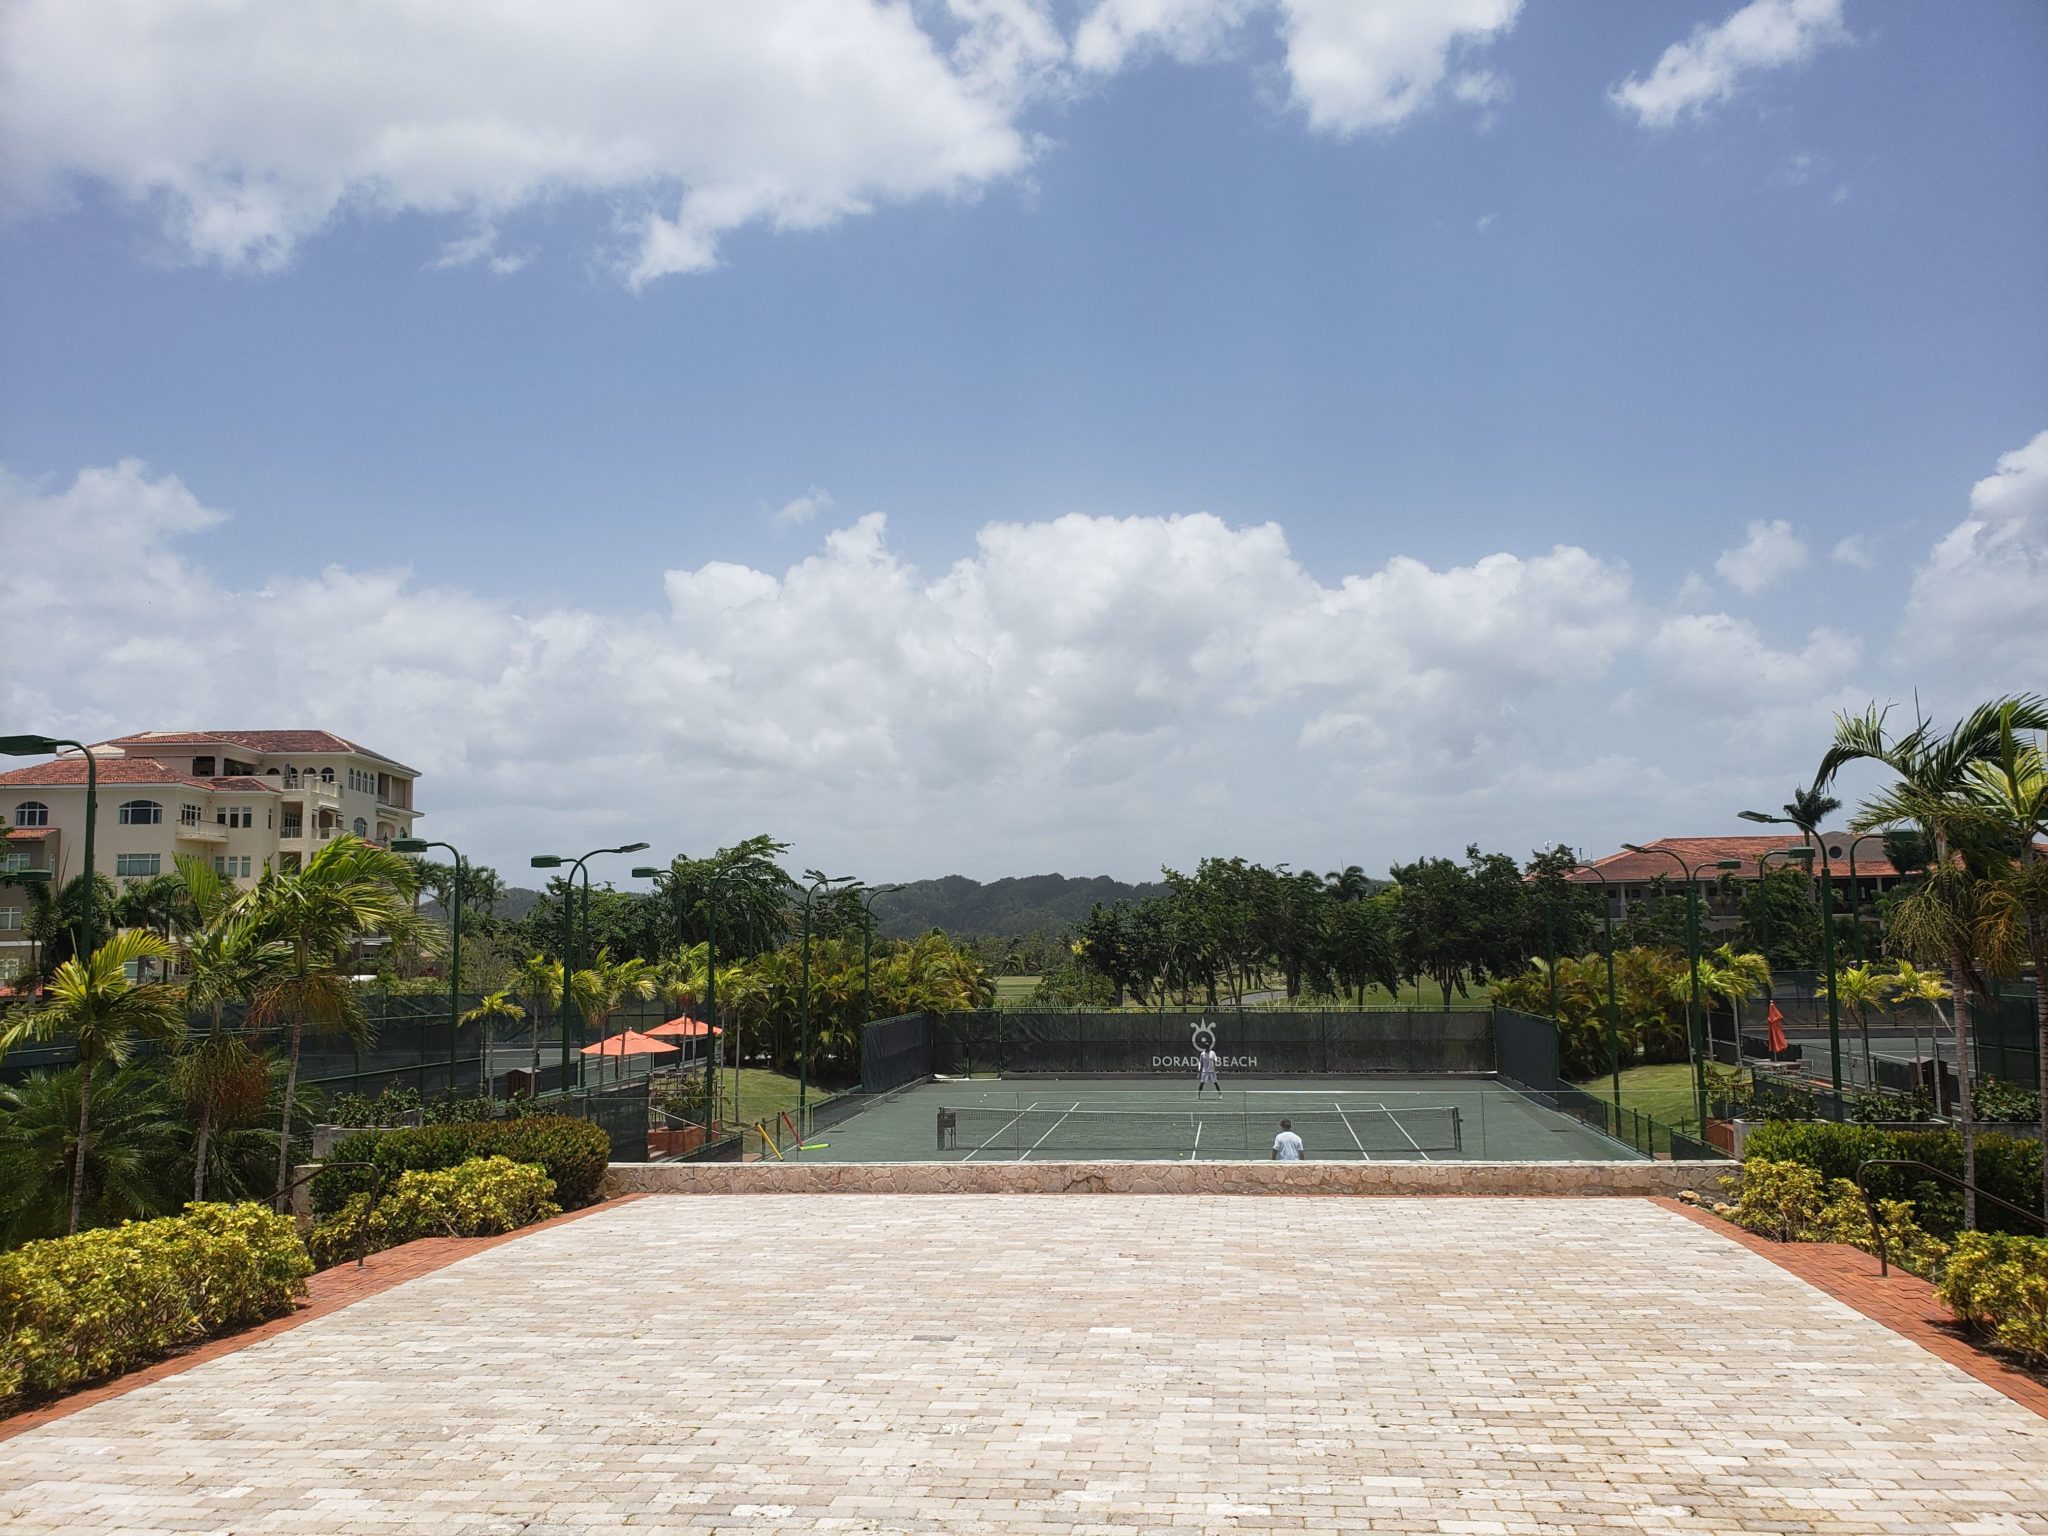 a tennis court with trees and buildings in the background